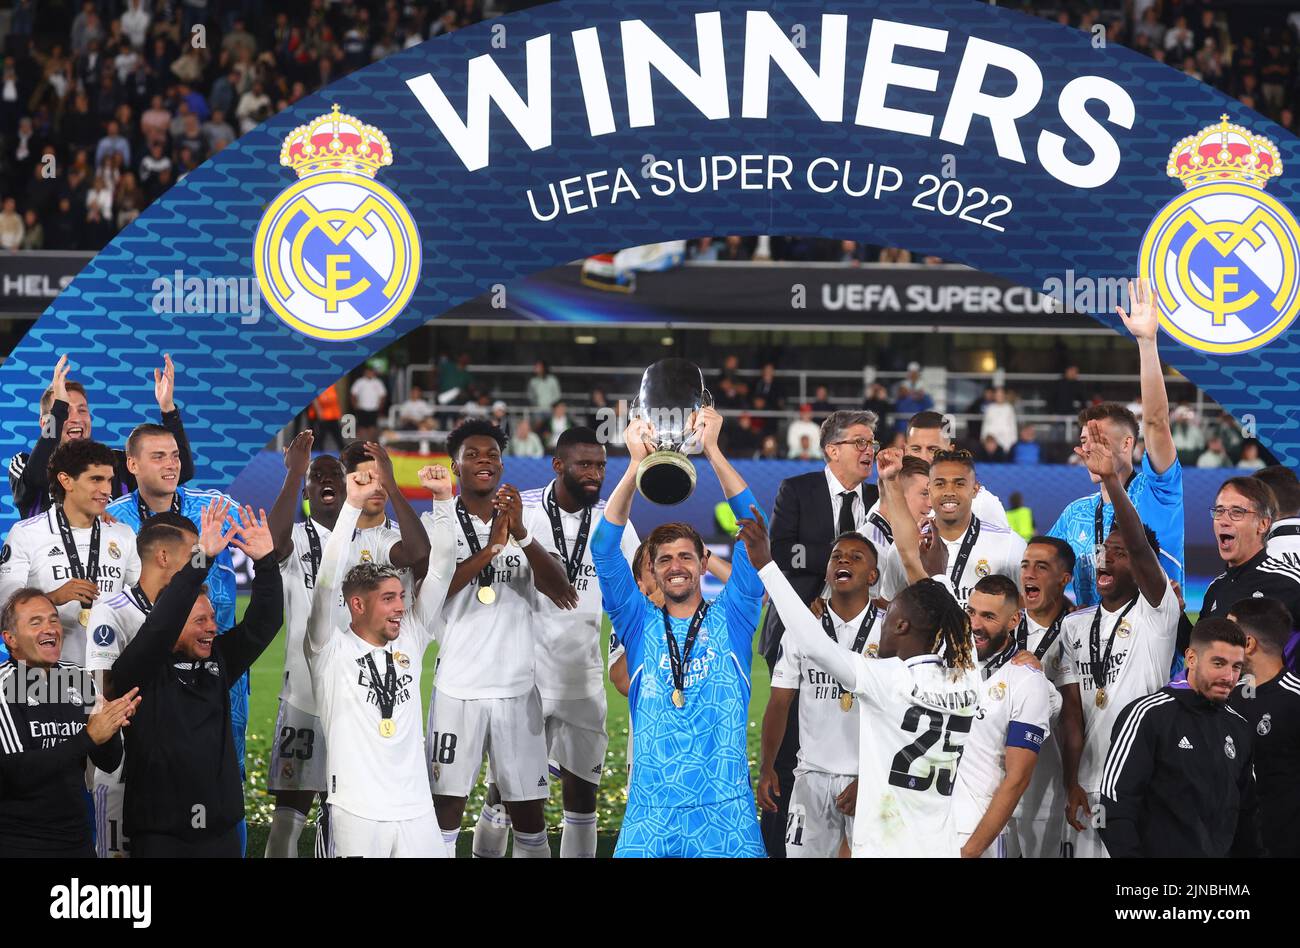 Soccer Football - European Super Cup - Real Madrid v Eintracht Frankfurt - Helsinki Olympic Stadium, Helsinki, Finland - August 10, 2022 Real Madrid's Thibaut Courtois with the trophy as he celebrates with teammates after winning the European Super Cup REUTERS/Kai Pfaffenbach Stock Photo